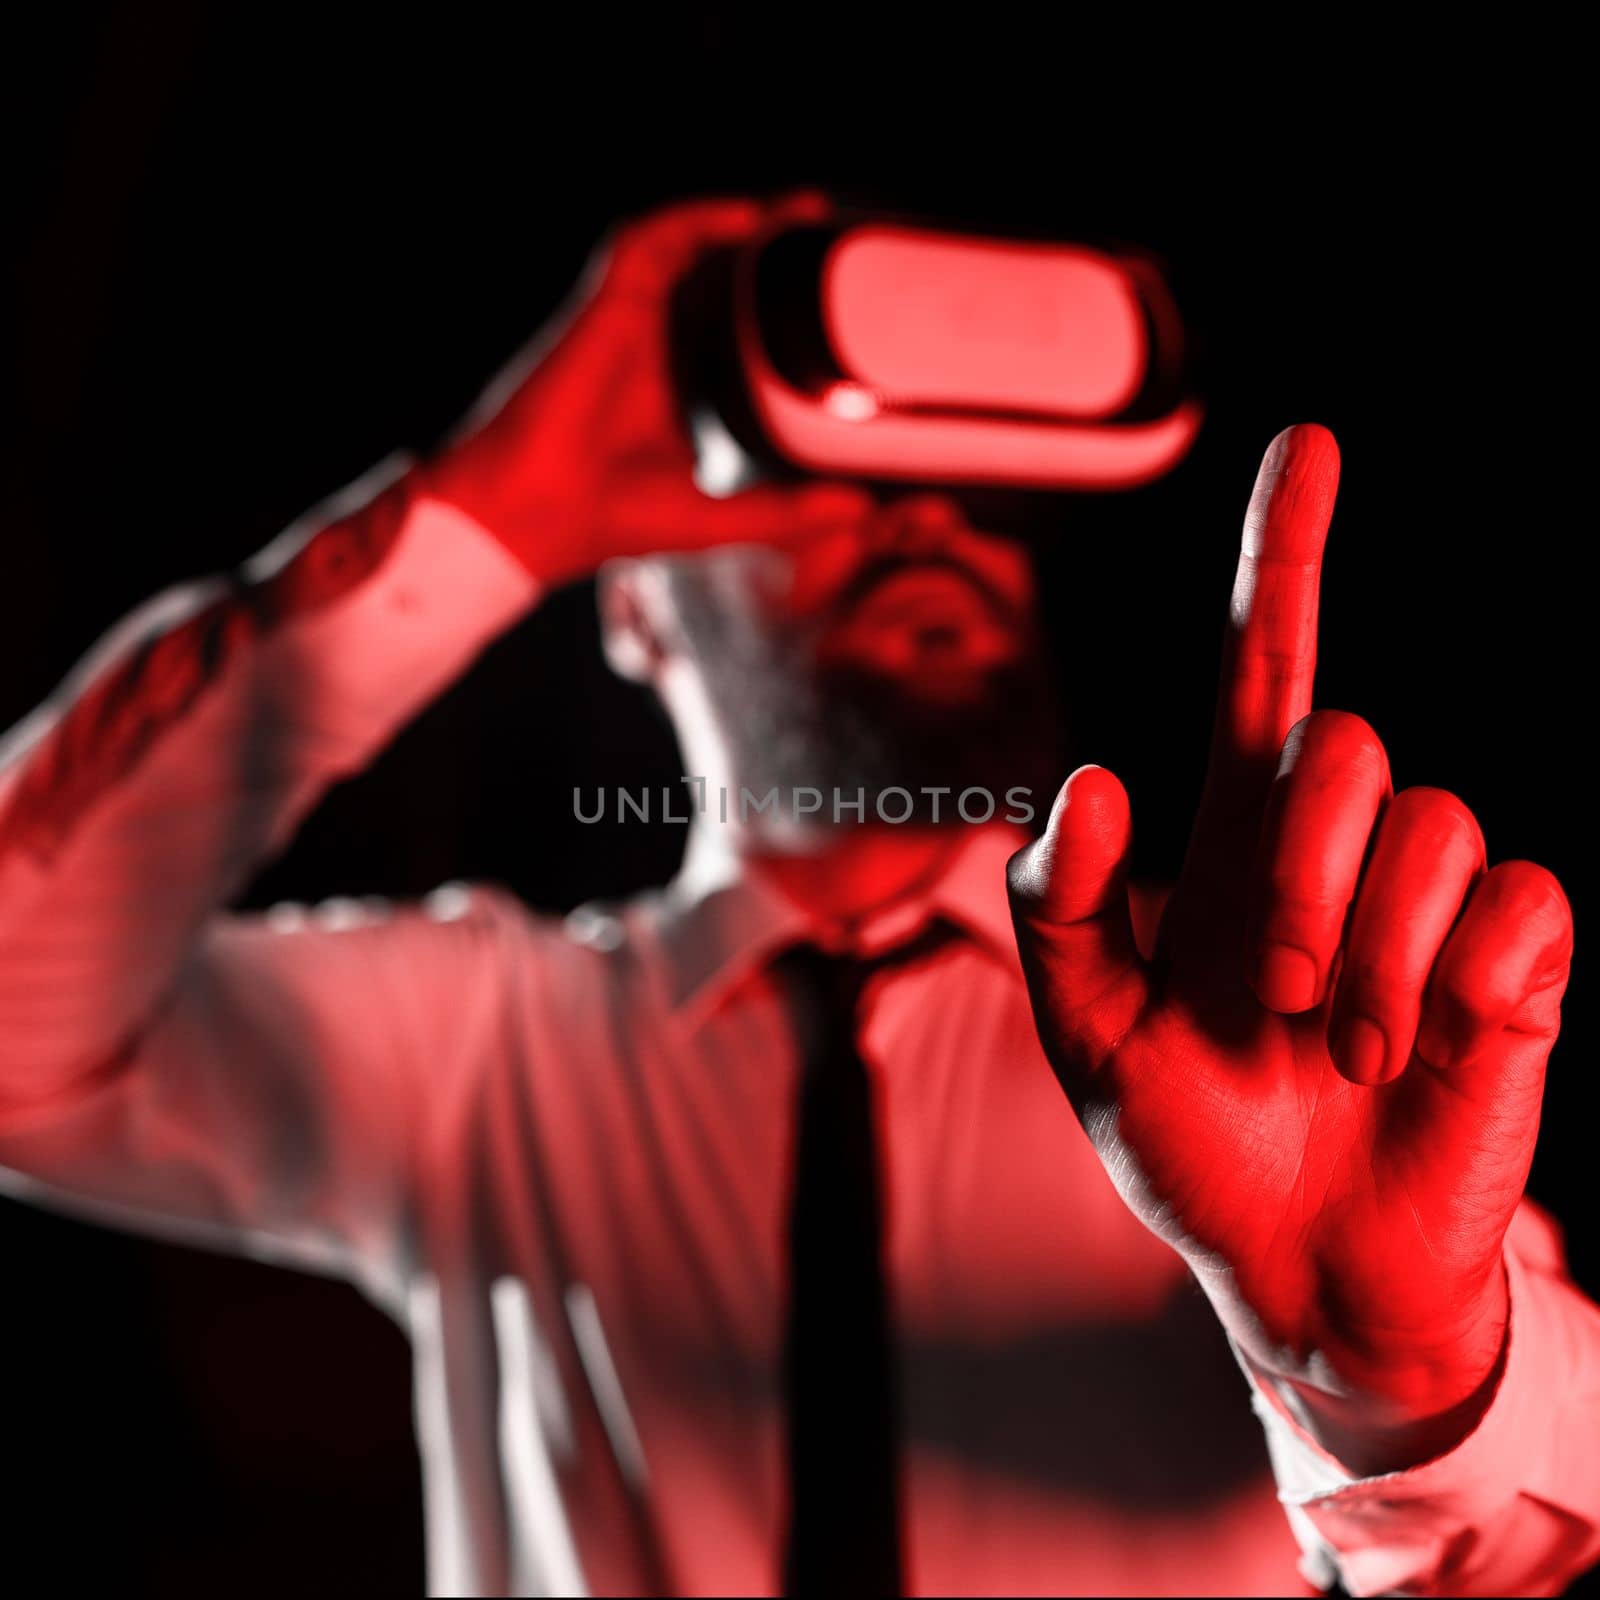 Man Wearing Vr Glasses And Pointing On Important Messages With One Finger. Businessman Having Virtual Reality Eyeglasses And Showing Crutial Informations. by nialowwa